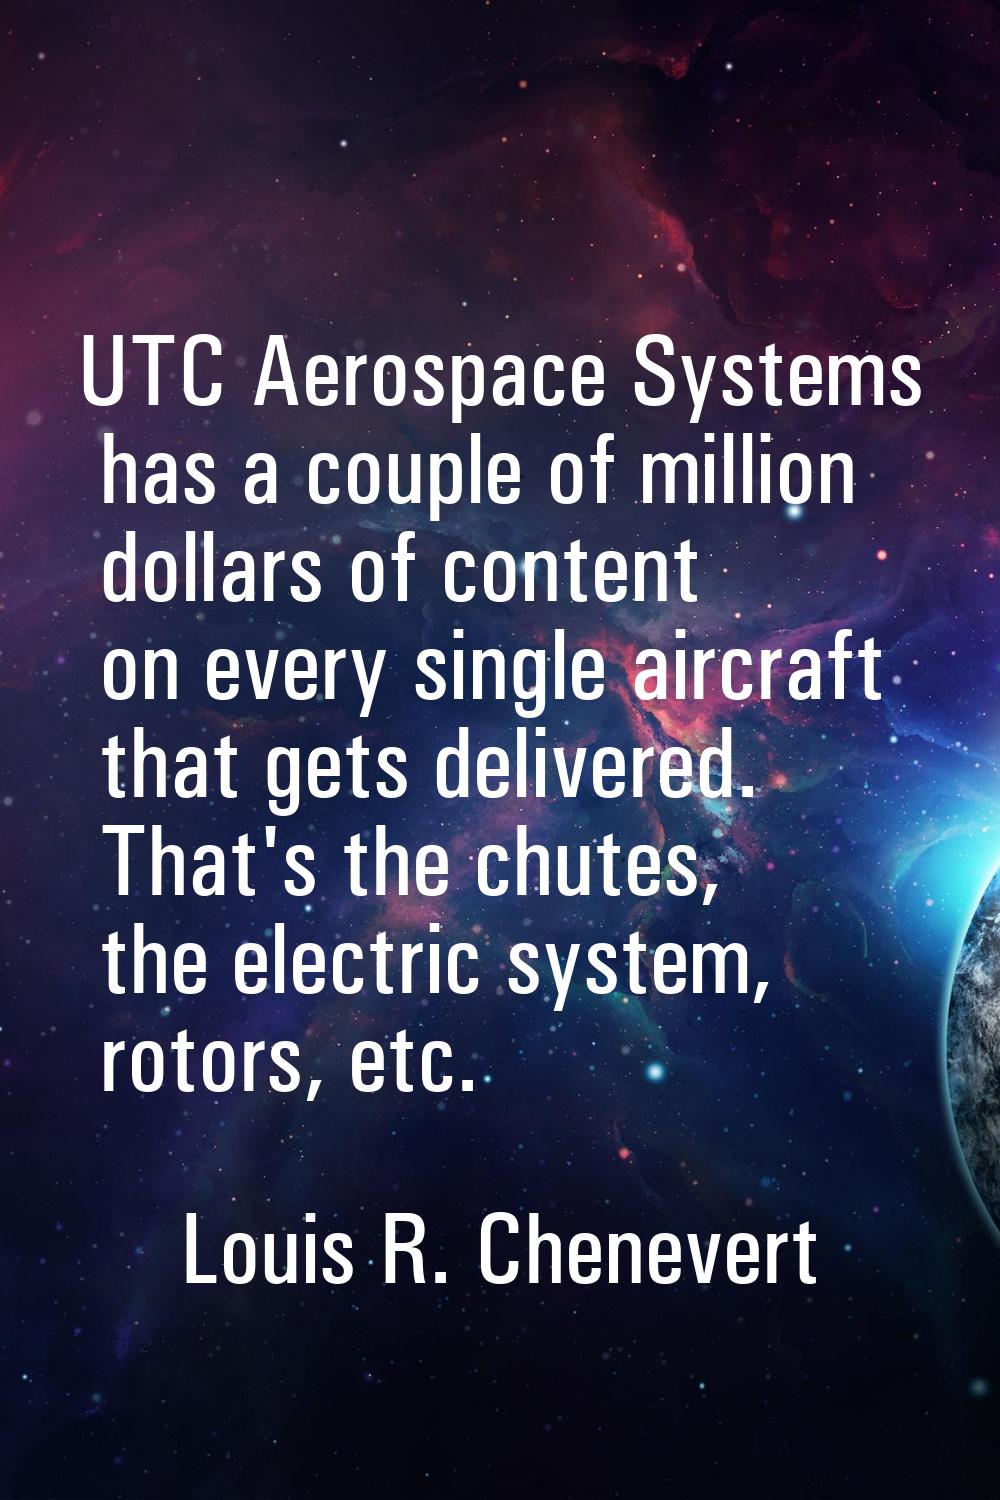 UTC Aerospace Systems has a couple of million dollars of content on every single aircraft that gets